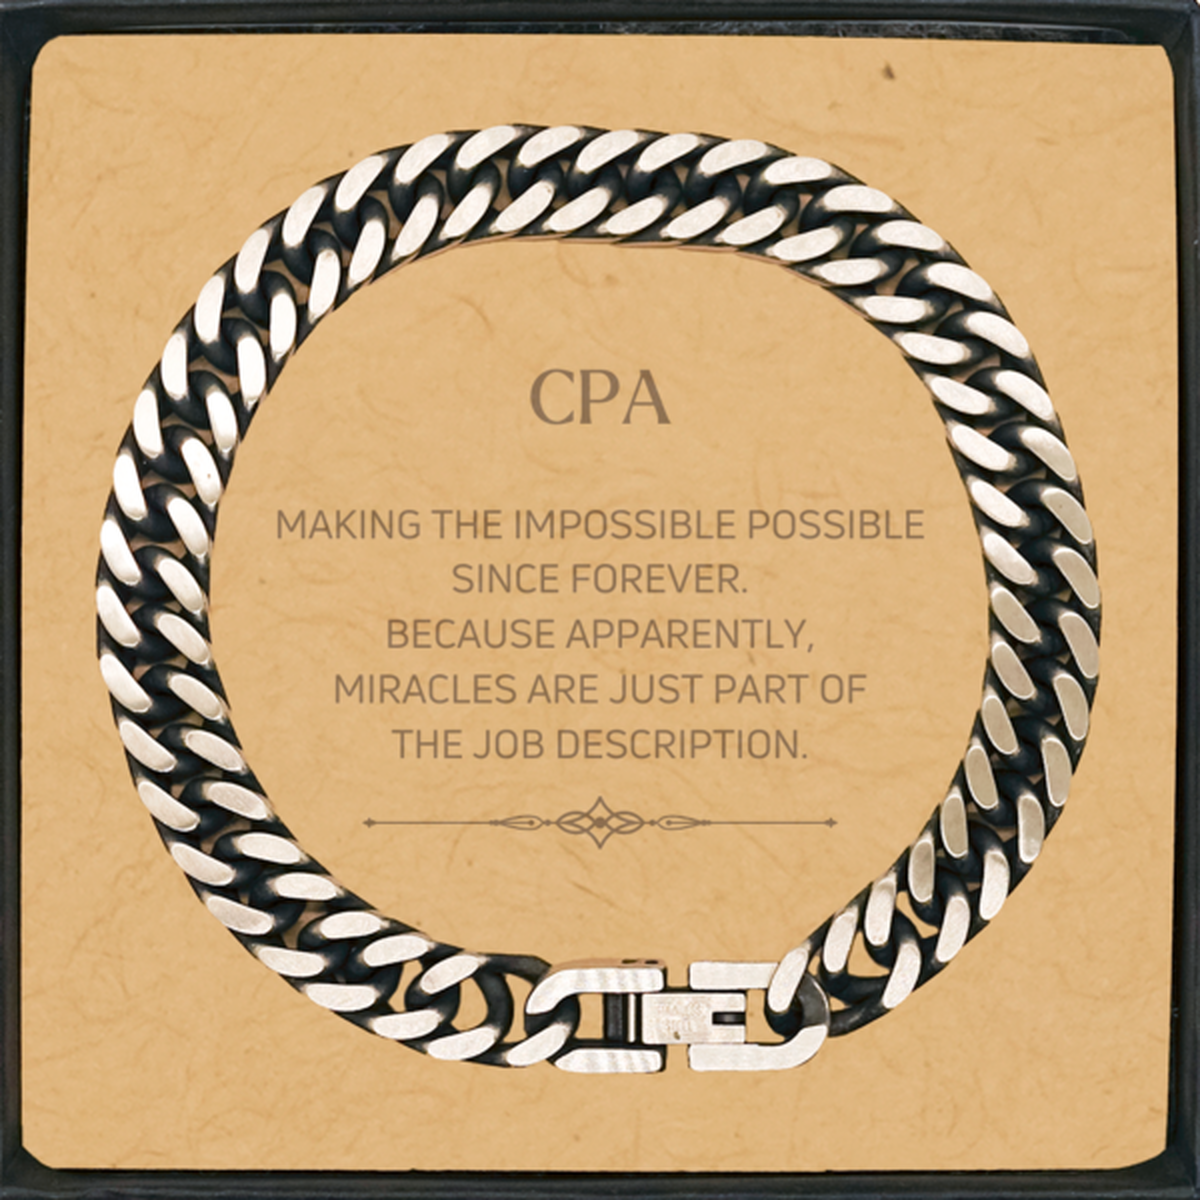 Funny CPA Gifts, Miracles are just part of the job description, Inspirational Birthday Cuban Link Chain Bracelet For CPA, Men, Women, Coworkers, Friends, Boss